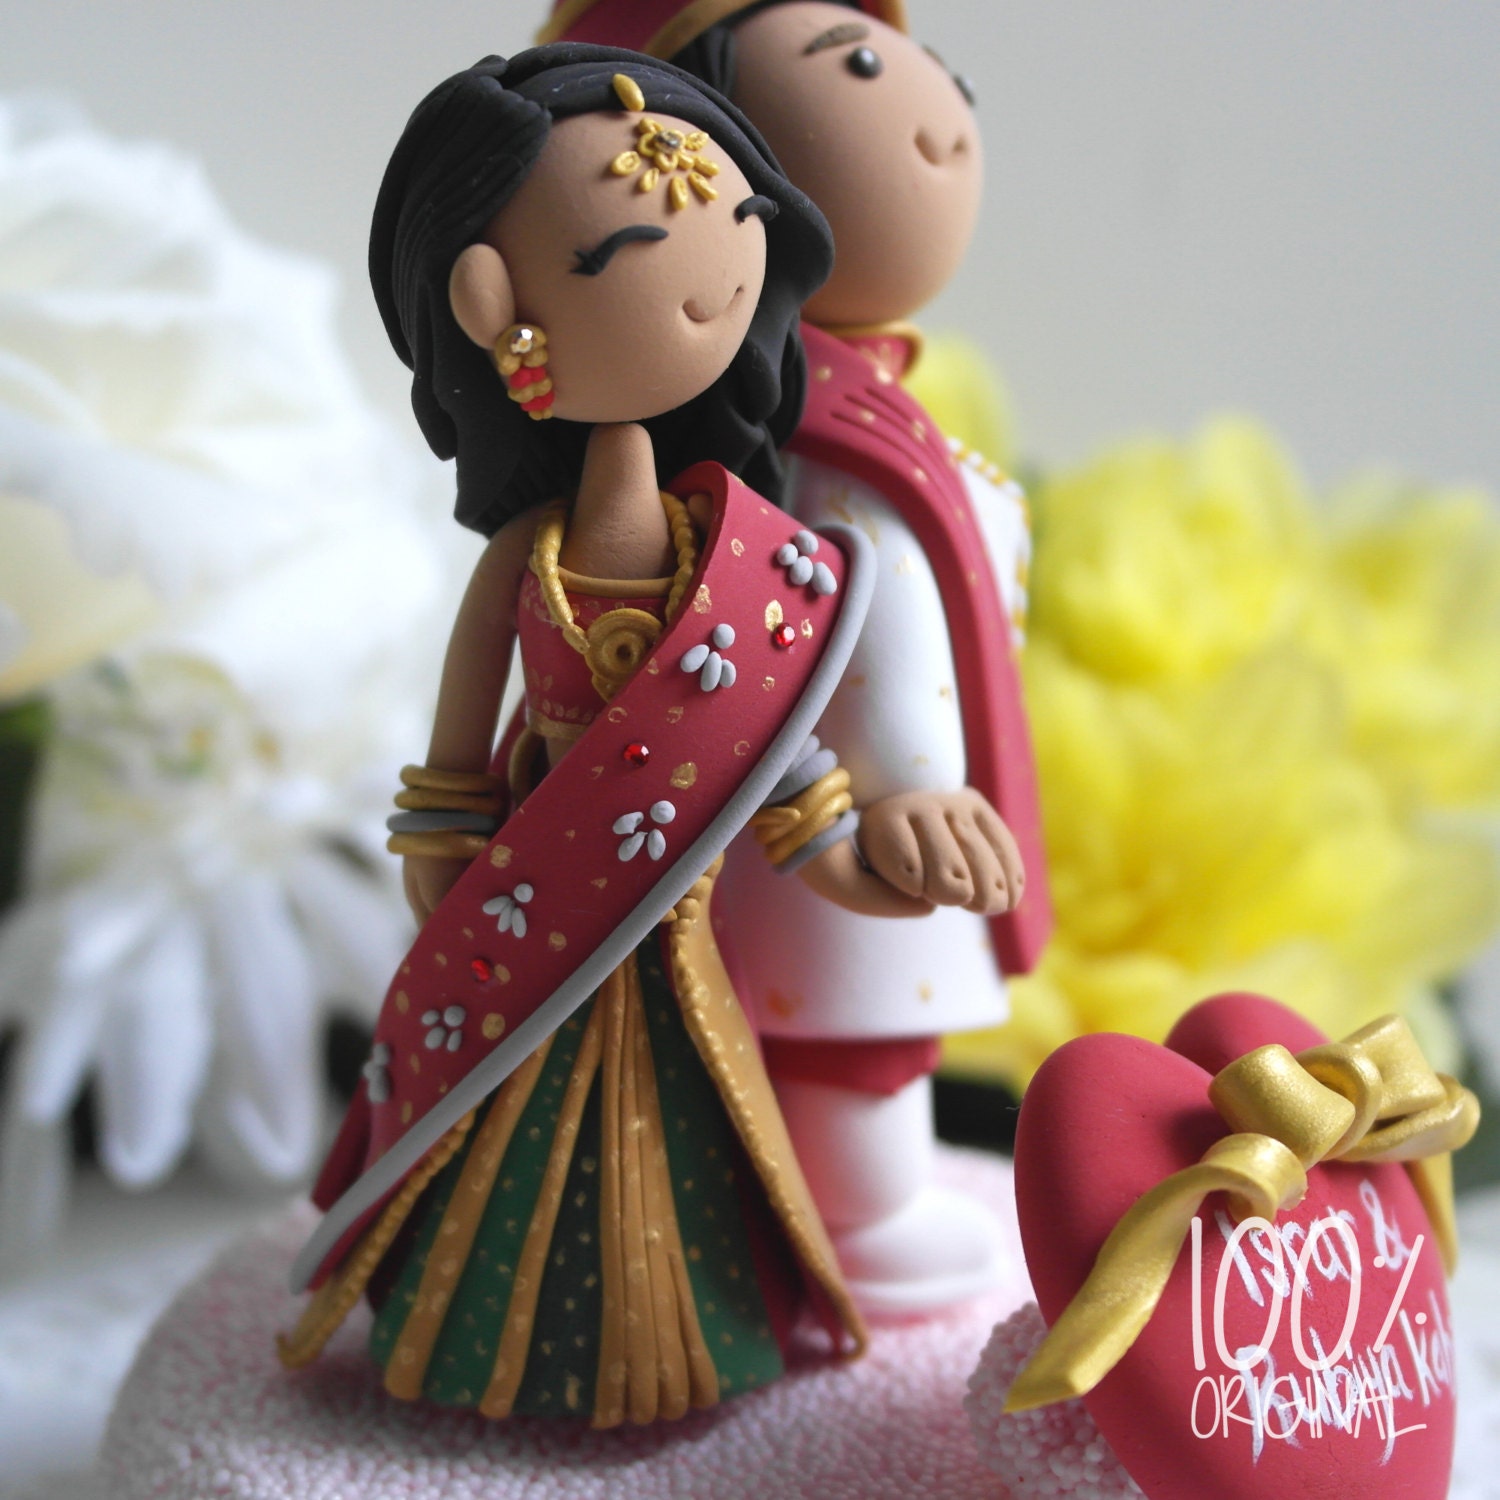 Acrylic Indian Cultural Traditional Hindu Dancing Cake Topper Decoration 